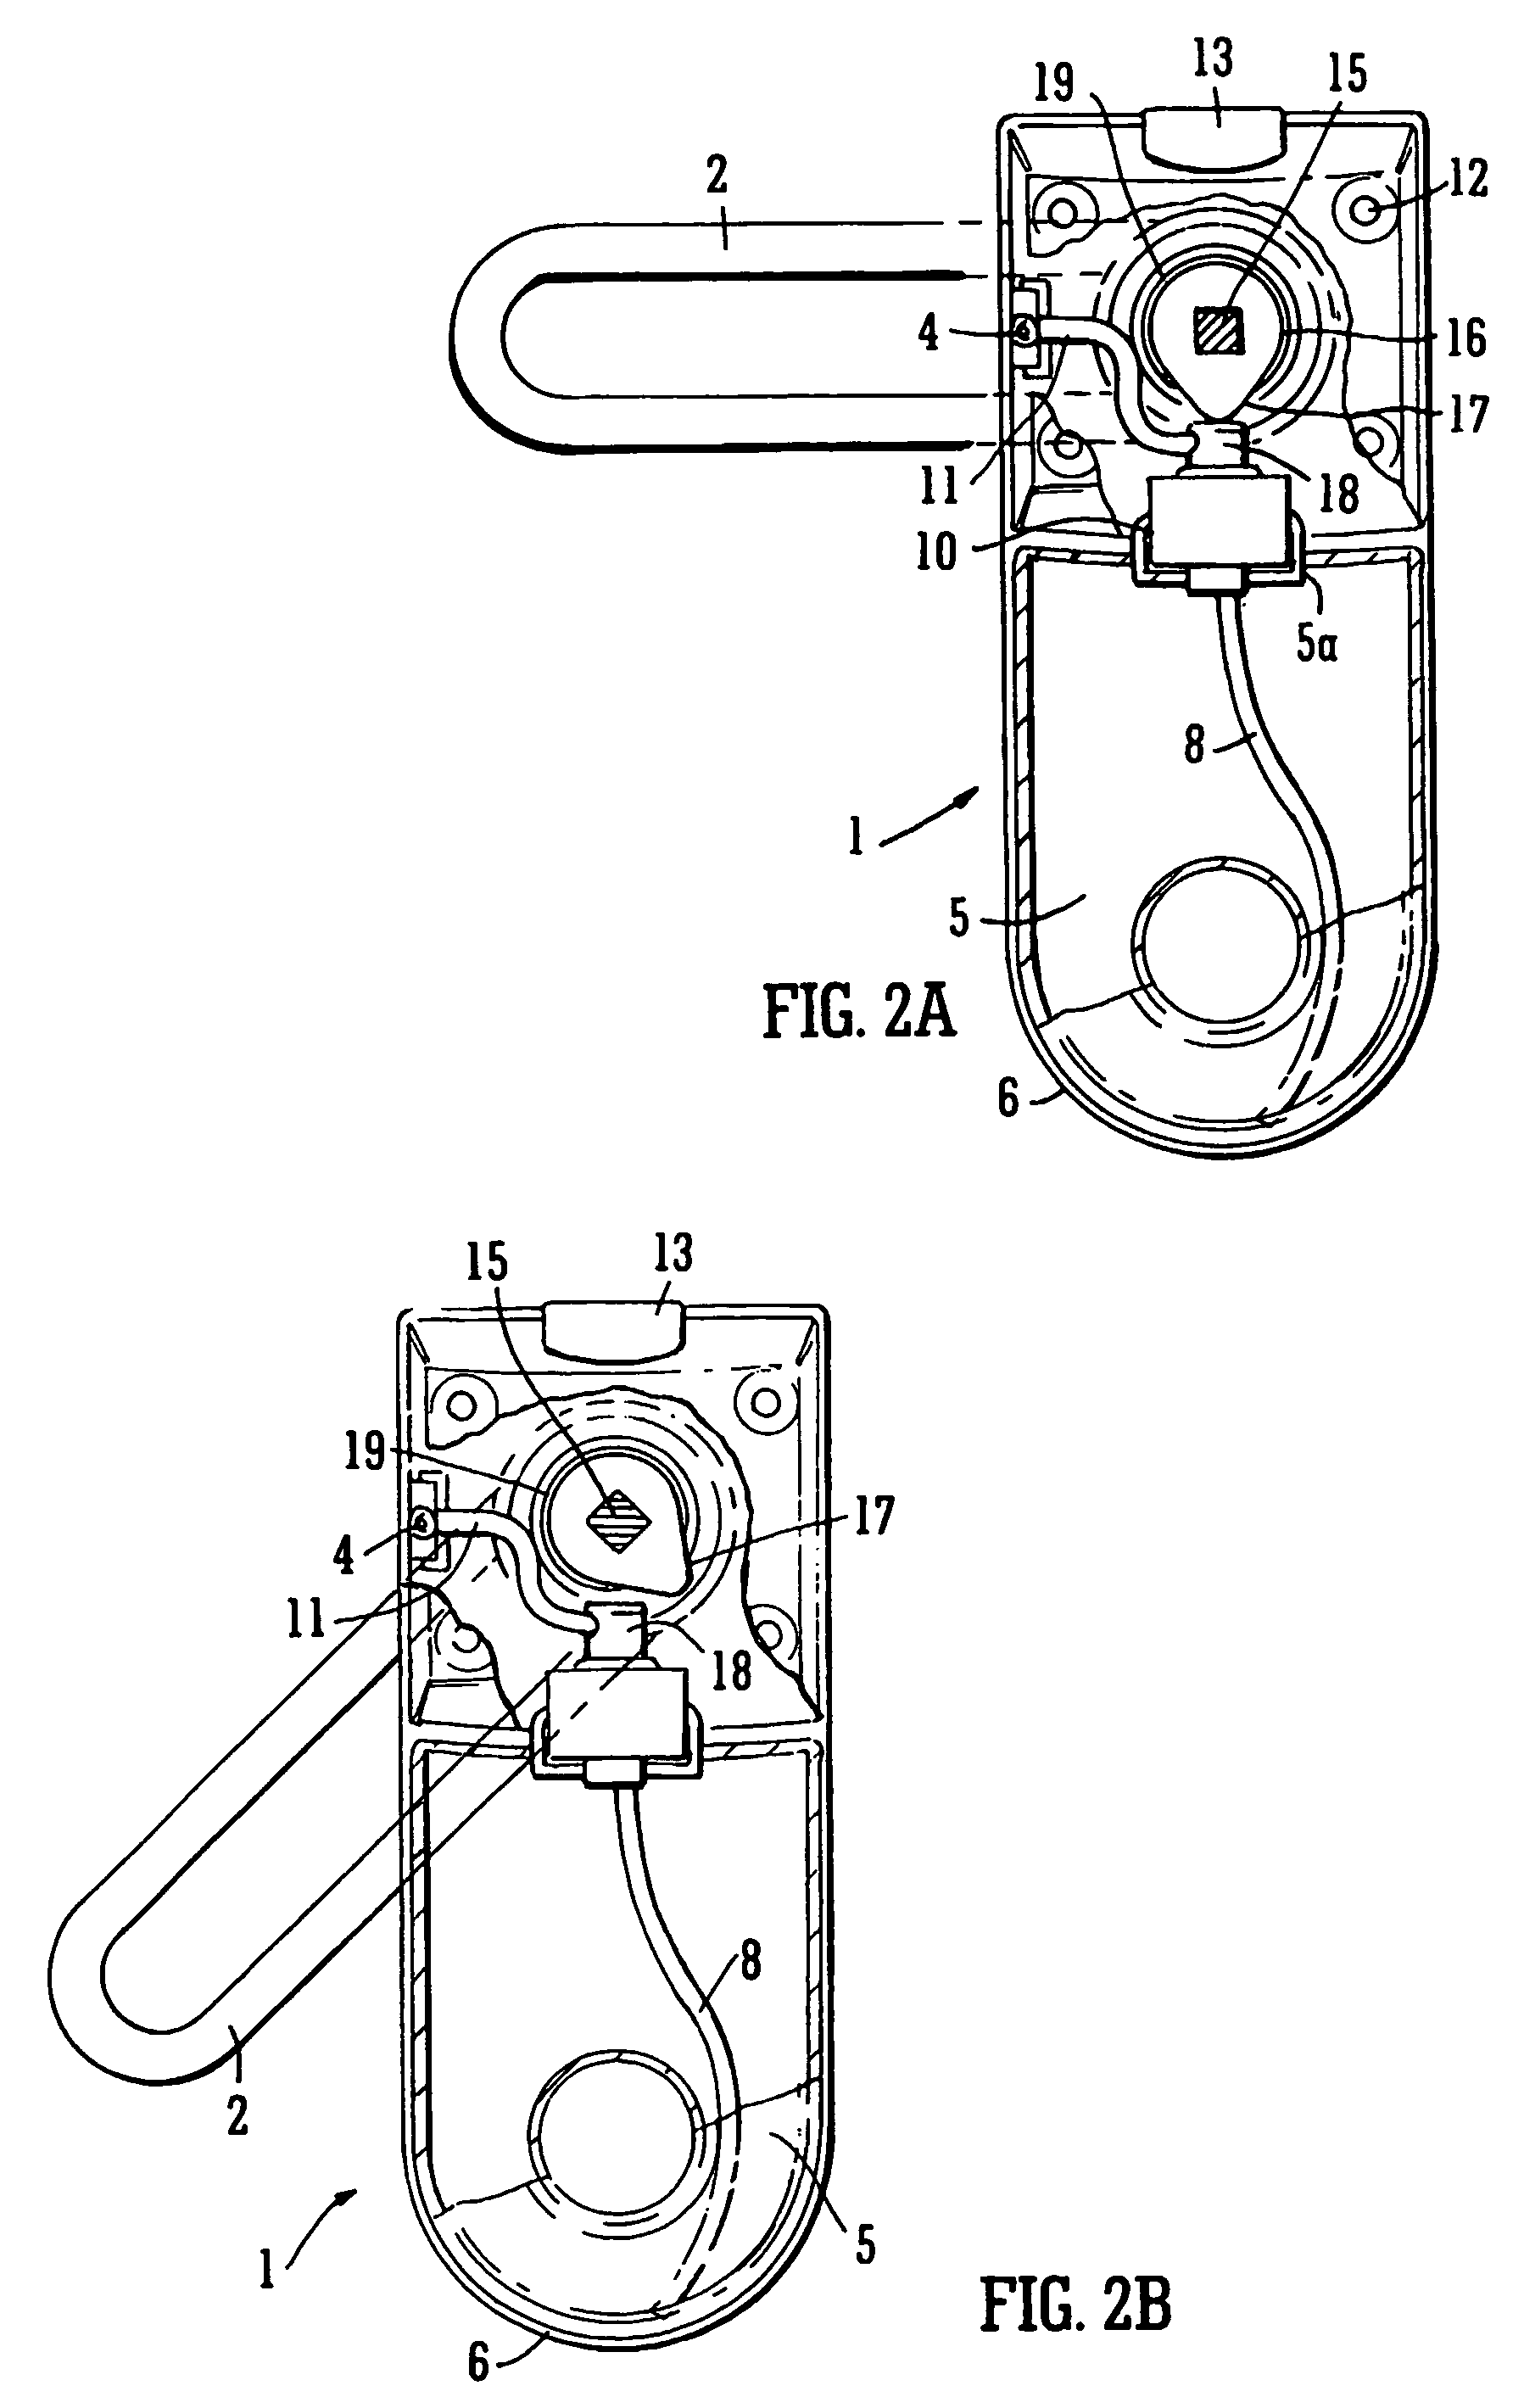 Method and apparatus for disinfecting items